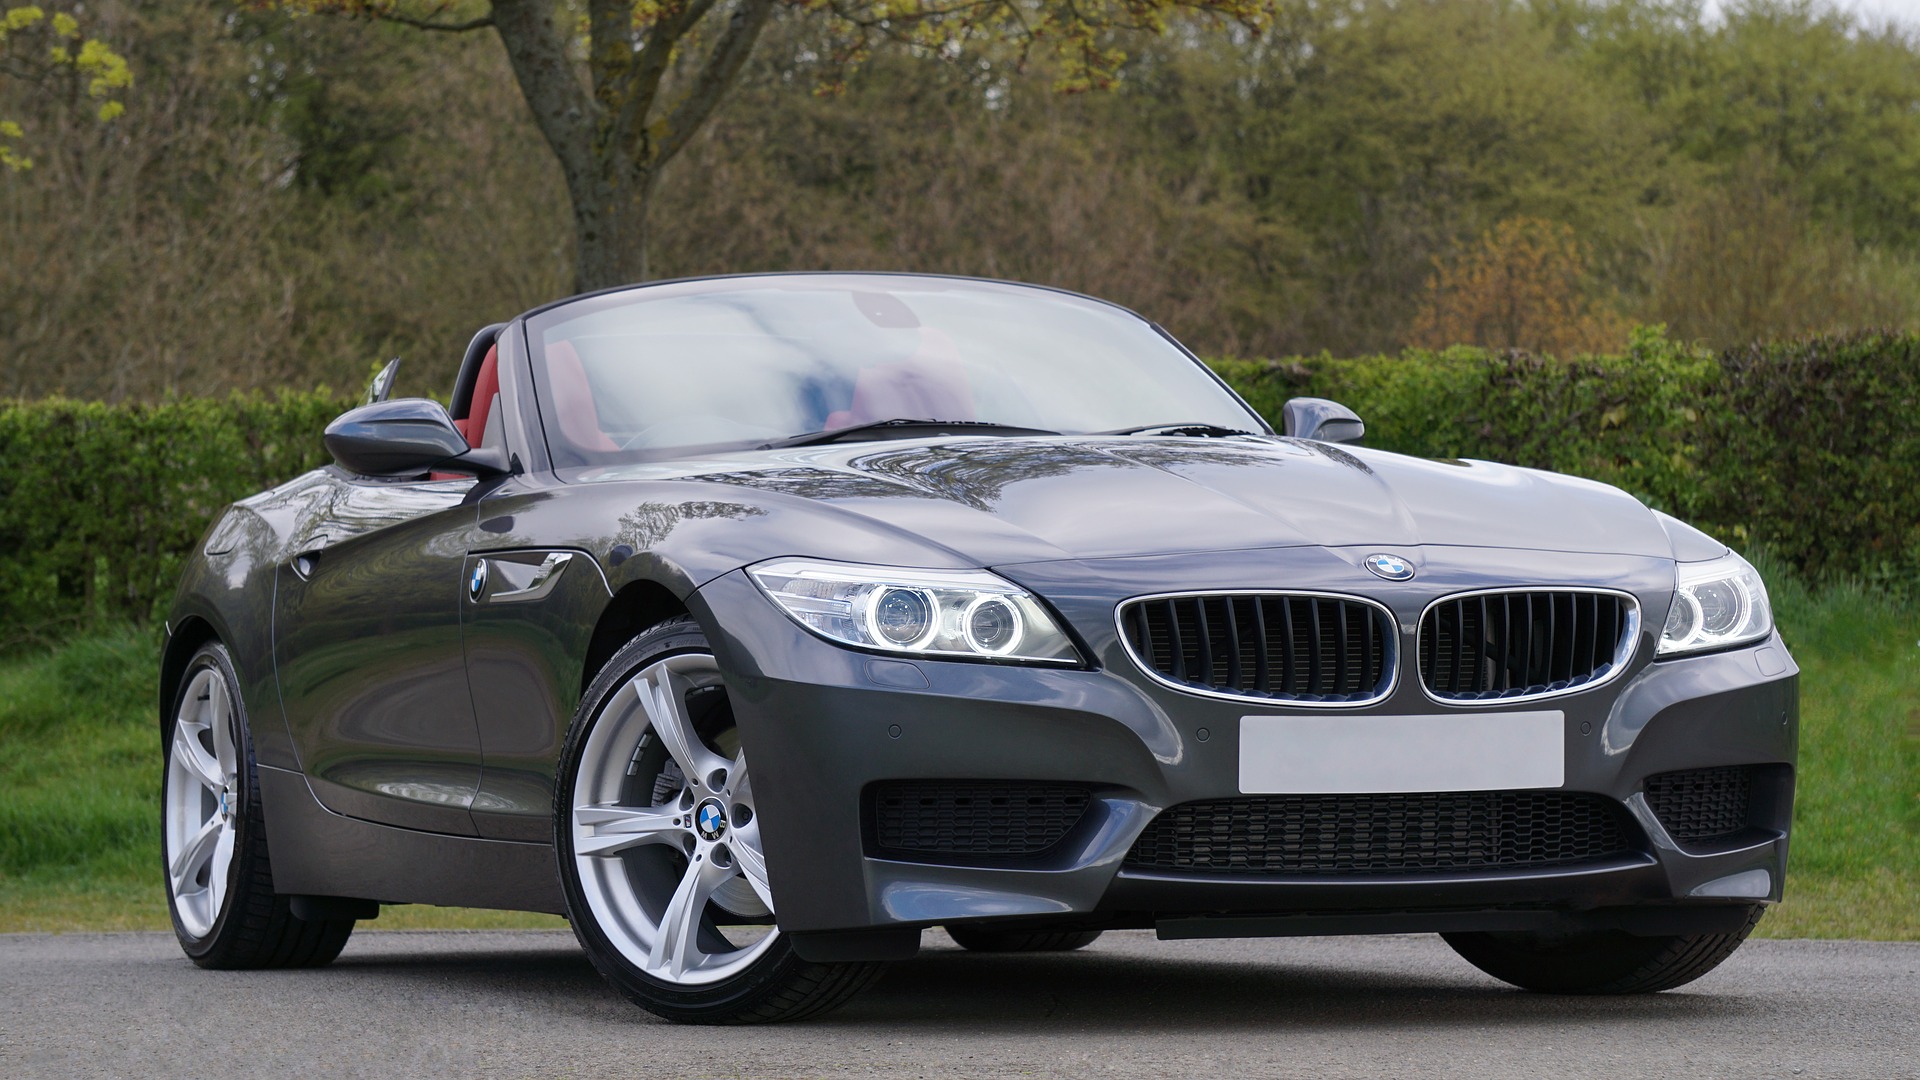 Used BMW Convertible for Sale in Houston, TX